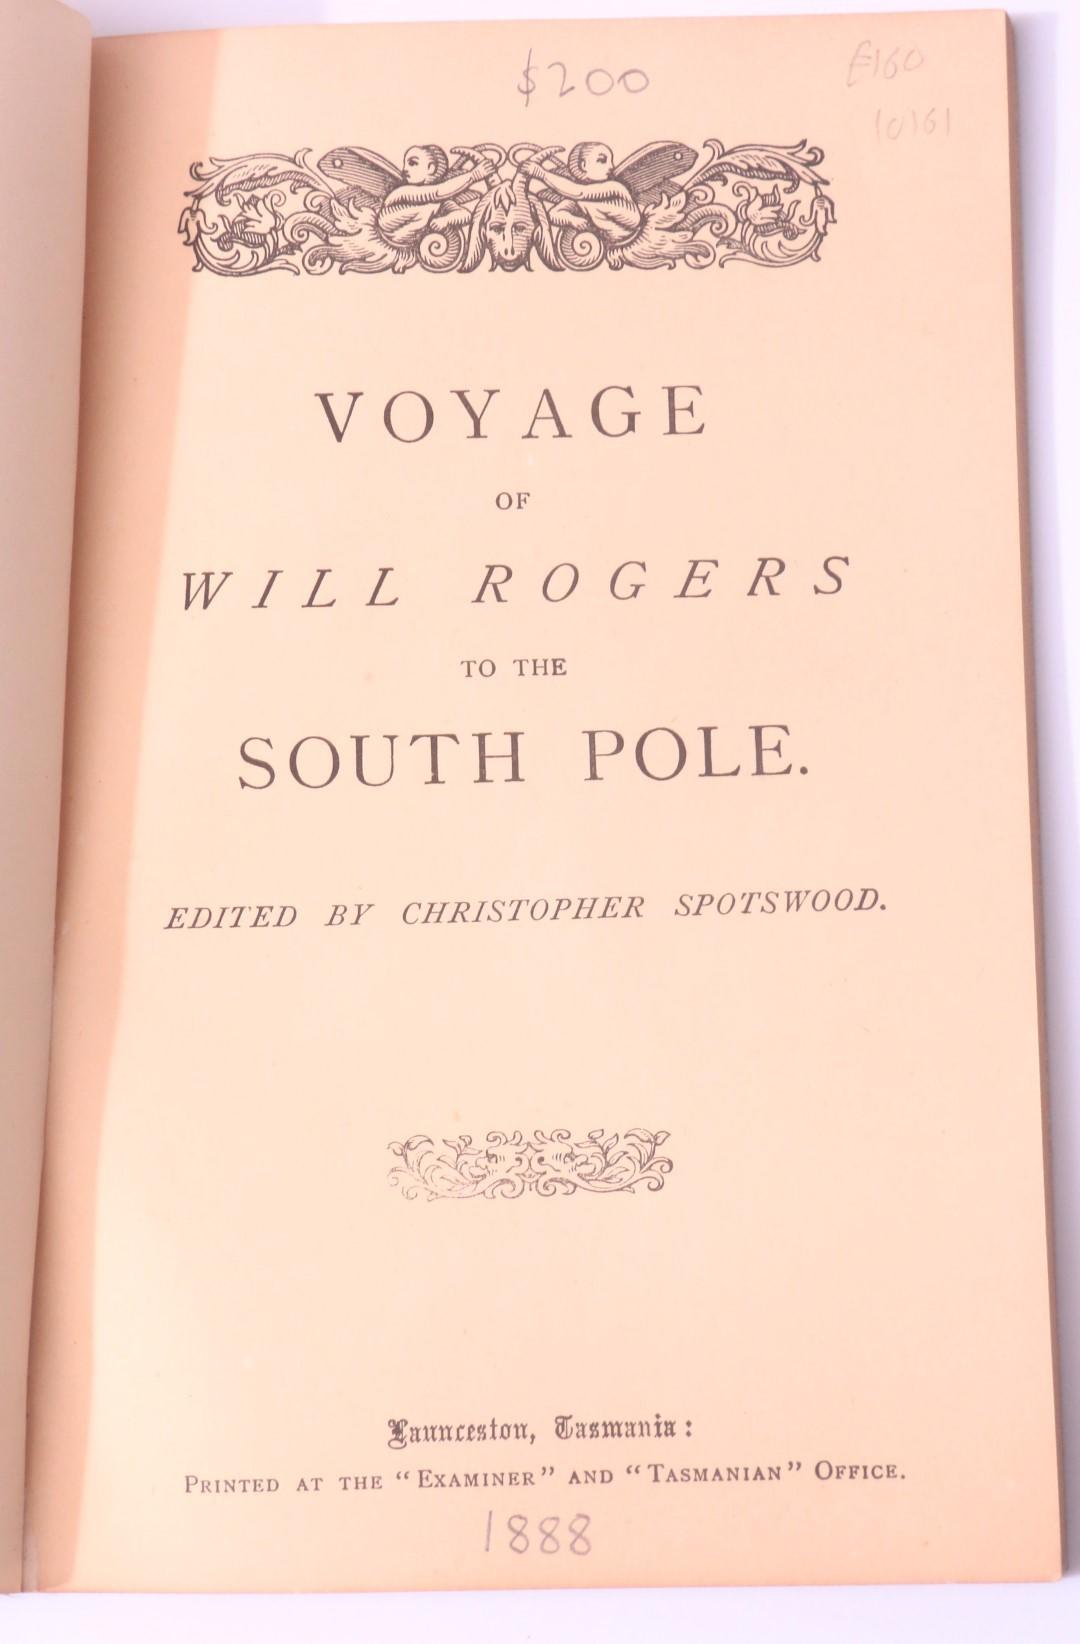 Christopher Spotswood [ed.] - Voyage of Will Rogers to the South Pole - Examiner / Tasmanian Office, n.d. [1888], First Edition.